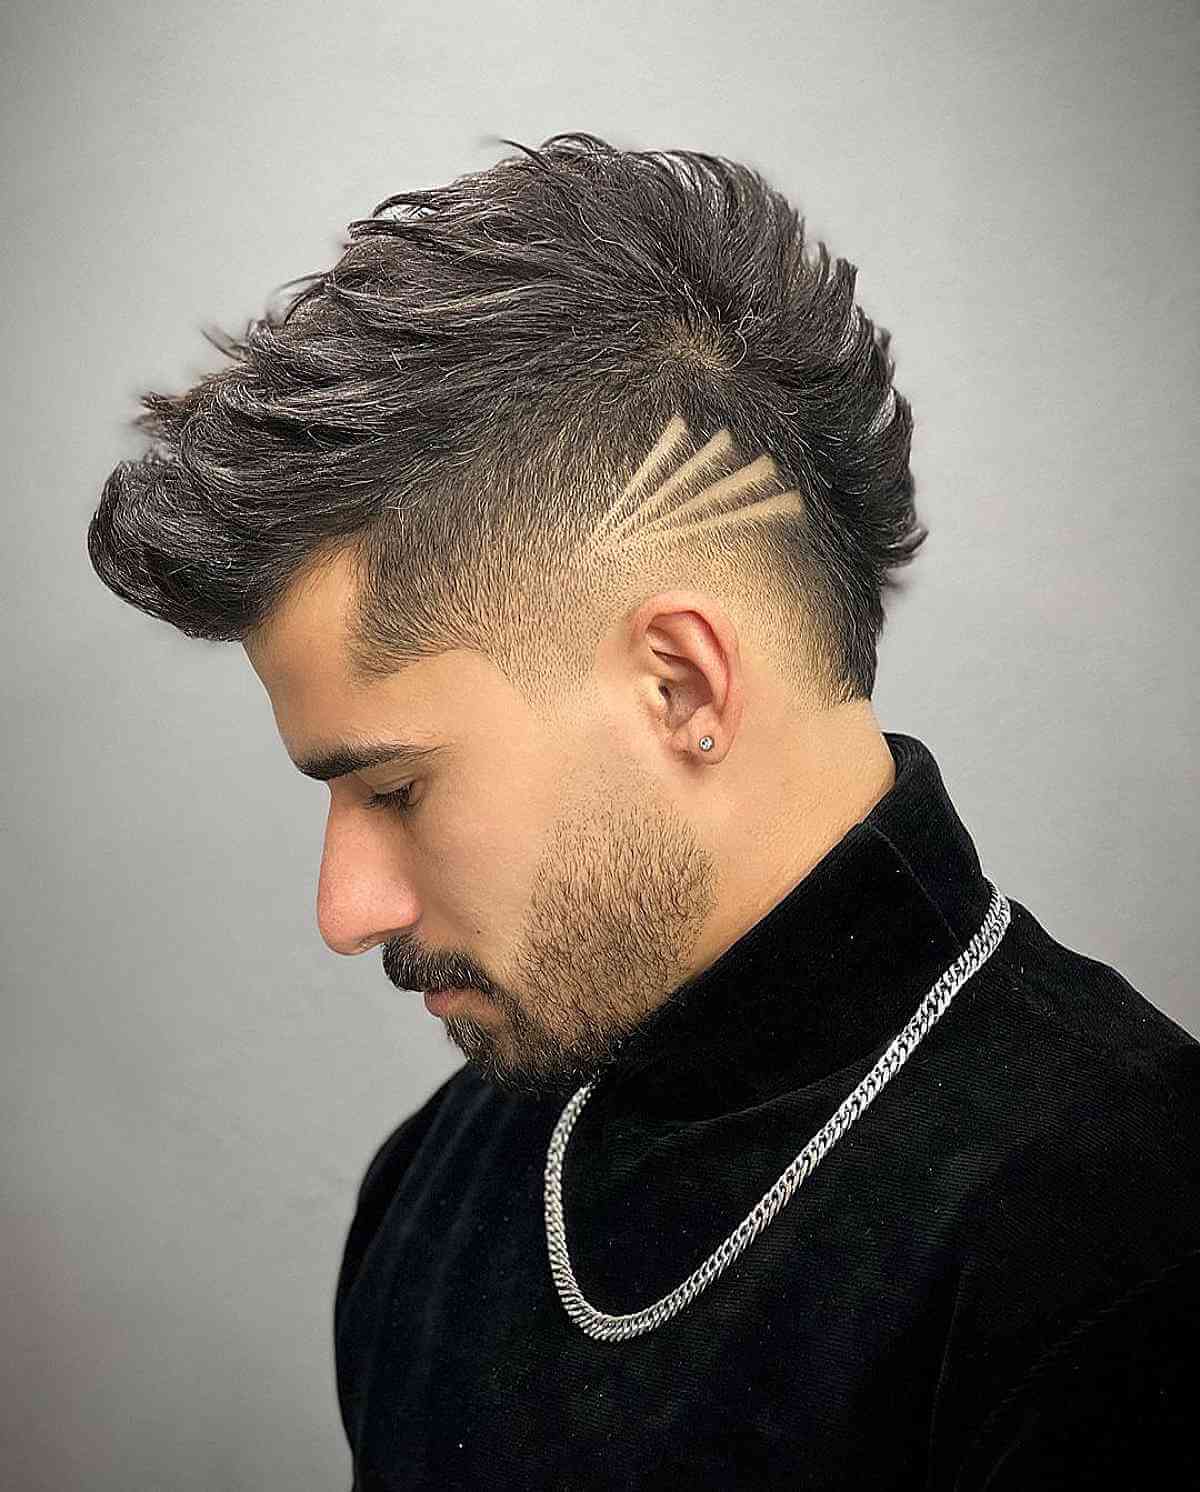 Bald Fade Haircuts: 17 Of The Coolest Styles For 2023